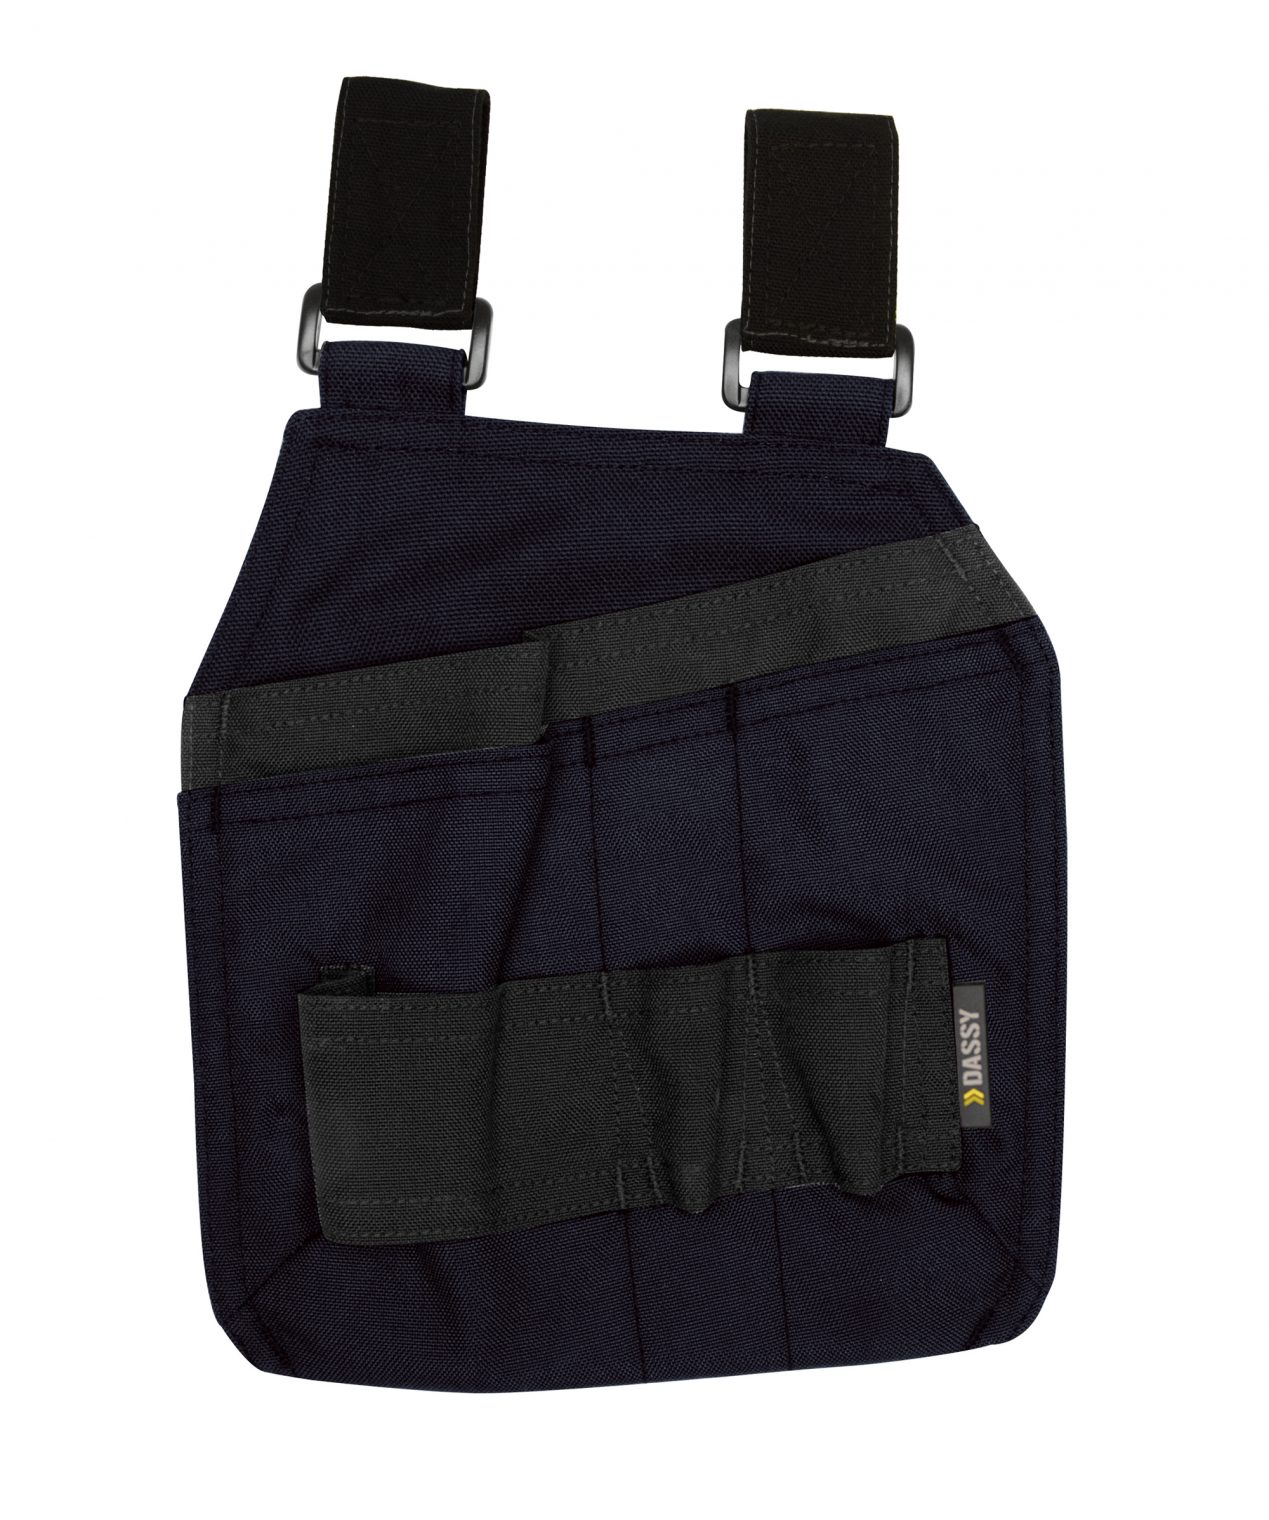 gordon with loops canvas tool pouches per pair with velcro loops midnight blue black front